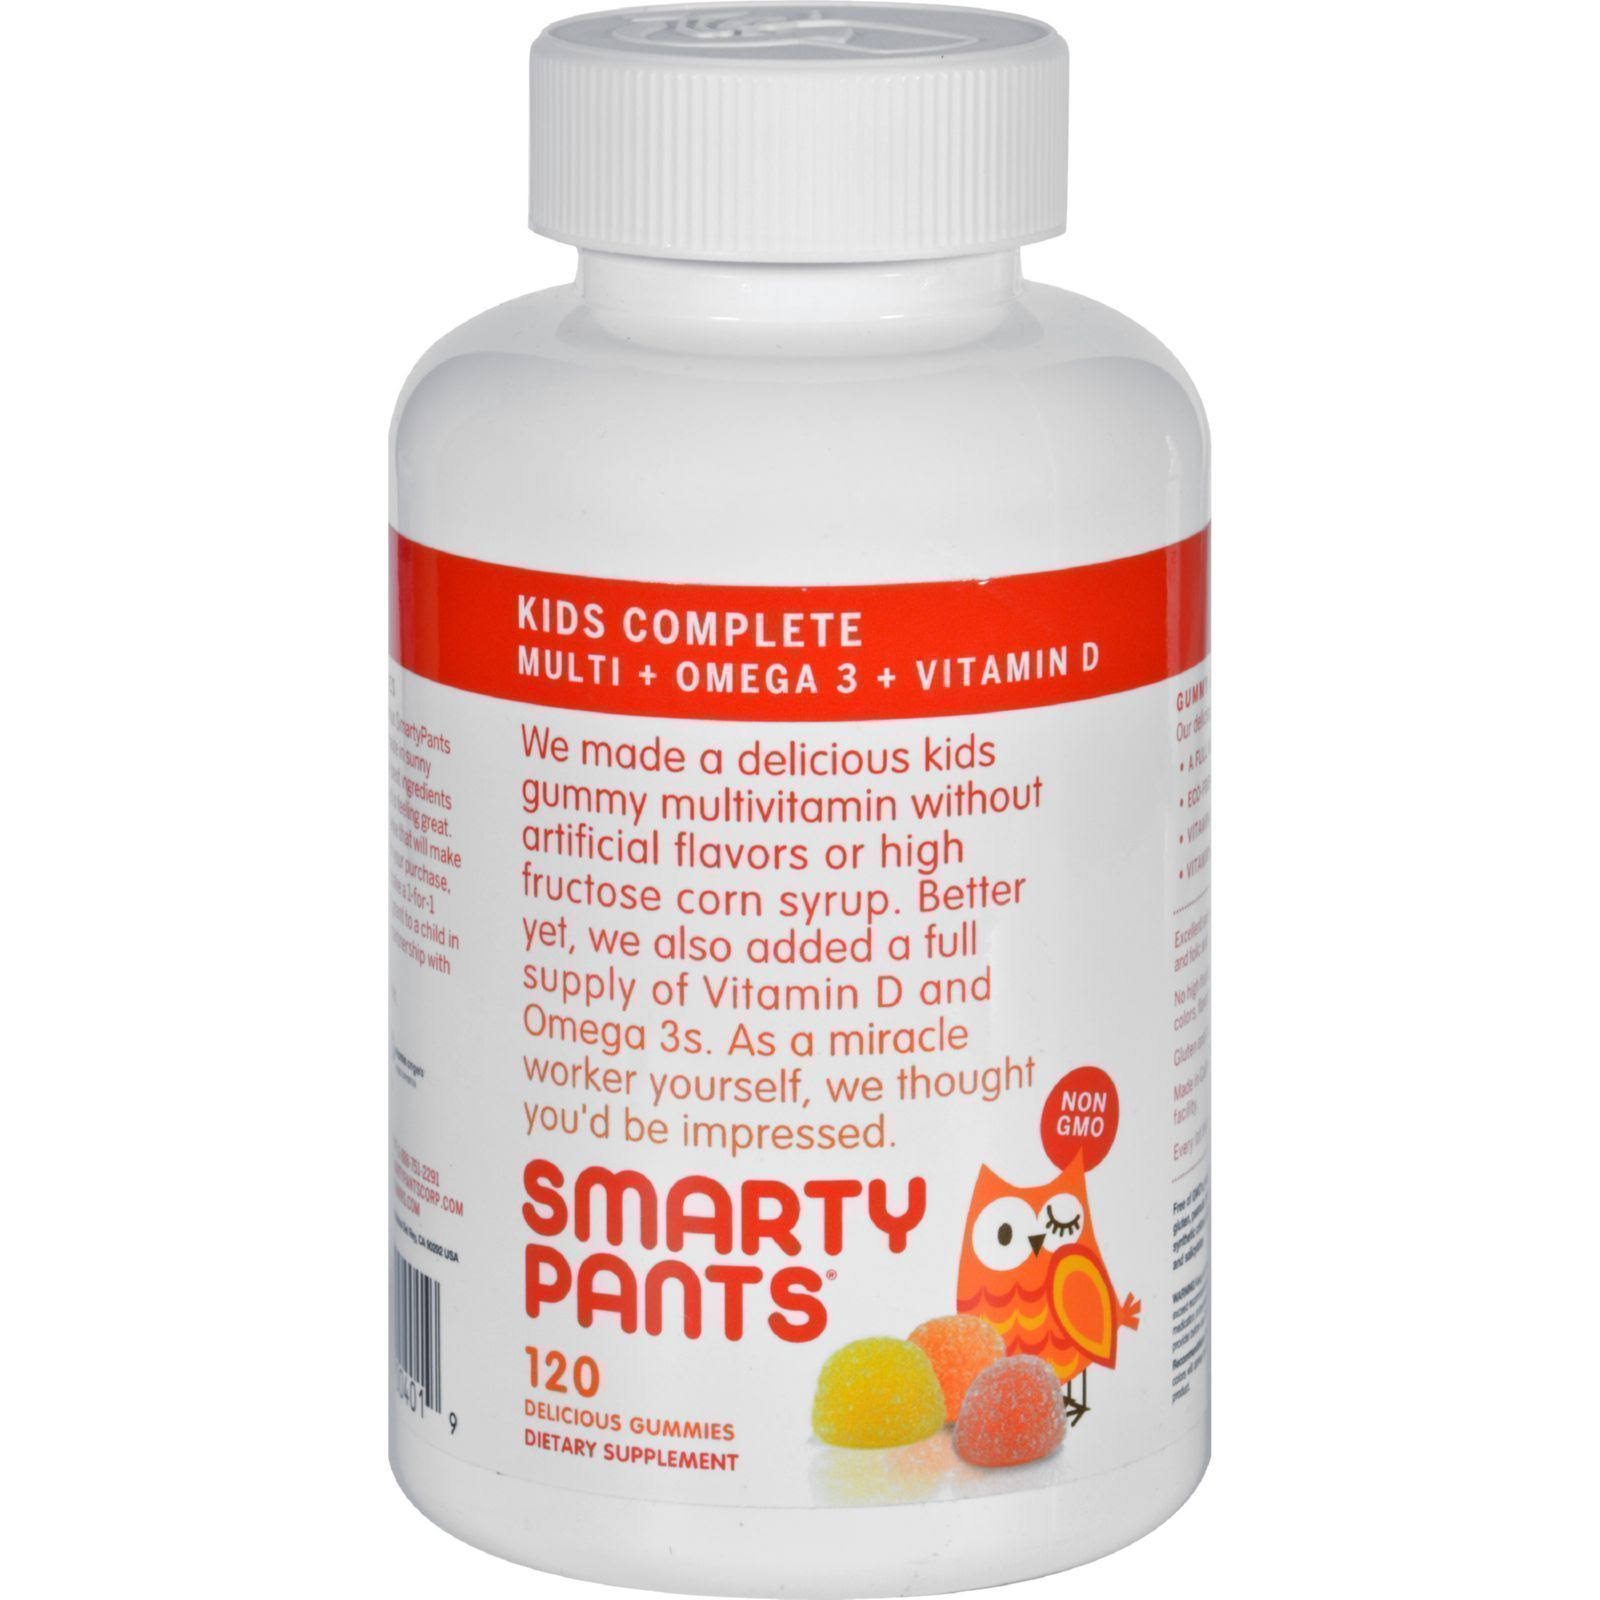 Smartypants Kids Complete Gummy Vitamins - with Omega 3, Fish Oil and Vitamin D, 120 Count